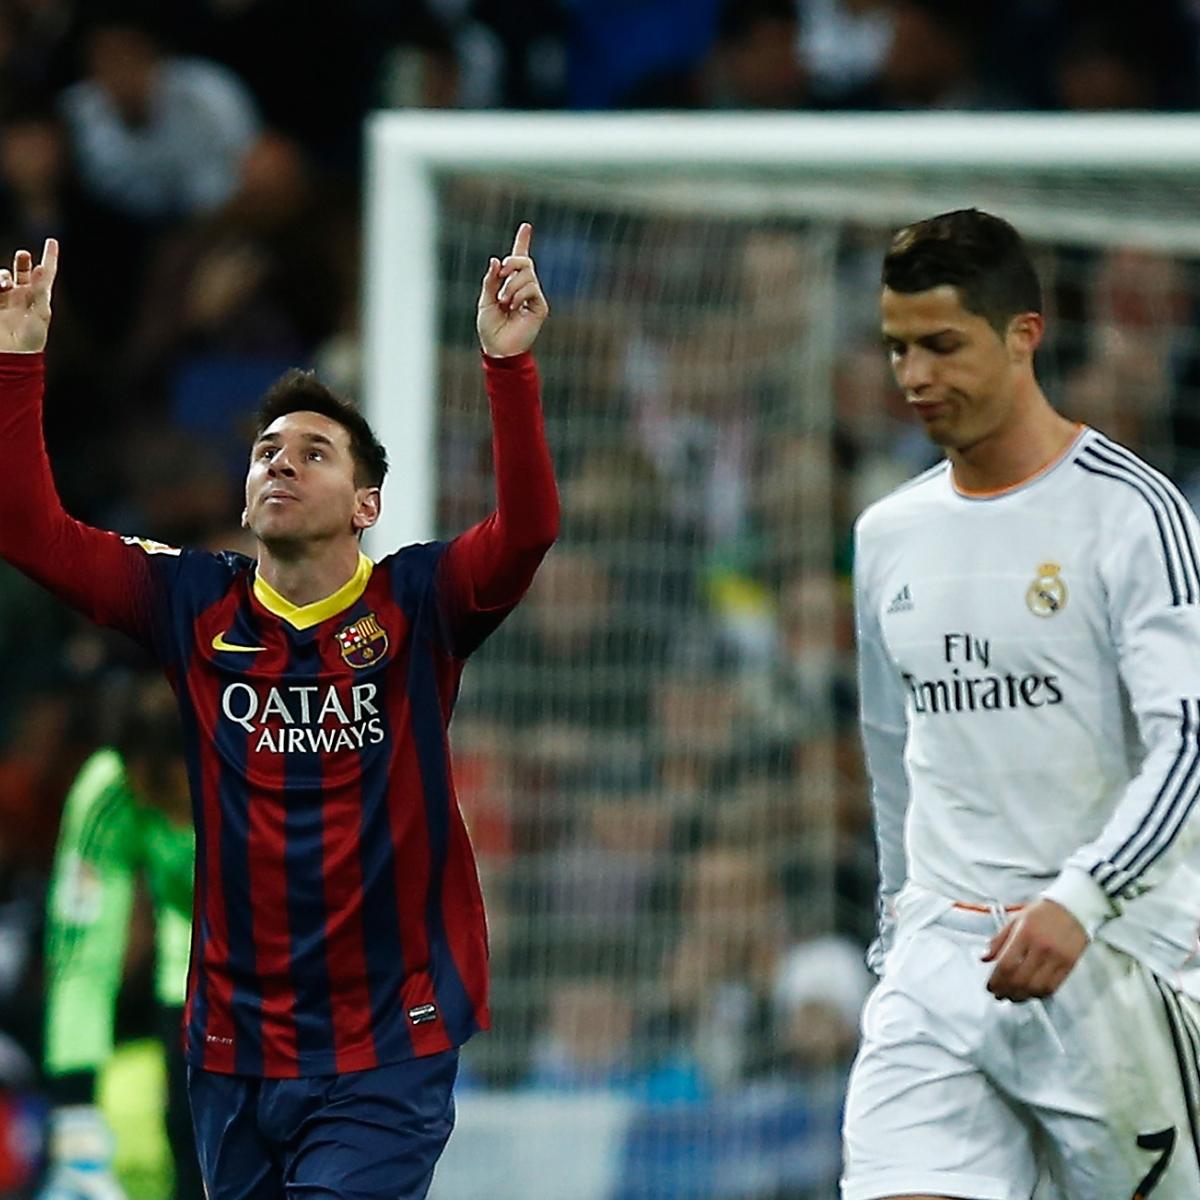 Lionel Messi v Cristiano Ronaldo: Who is the greatest of all time? - BBC  Sport